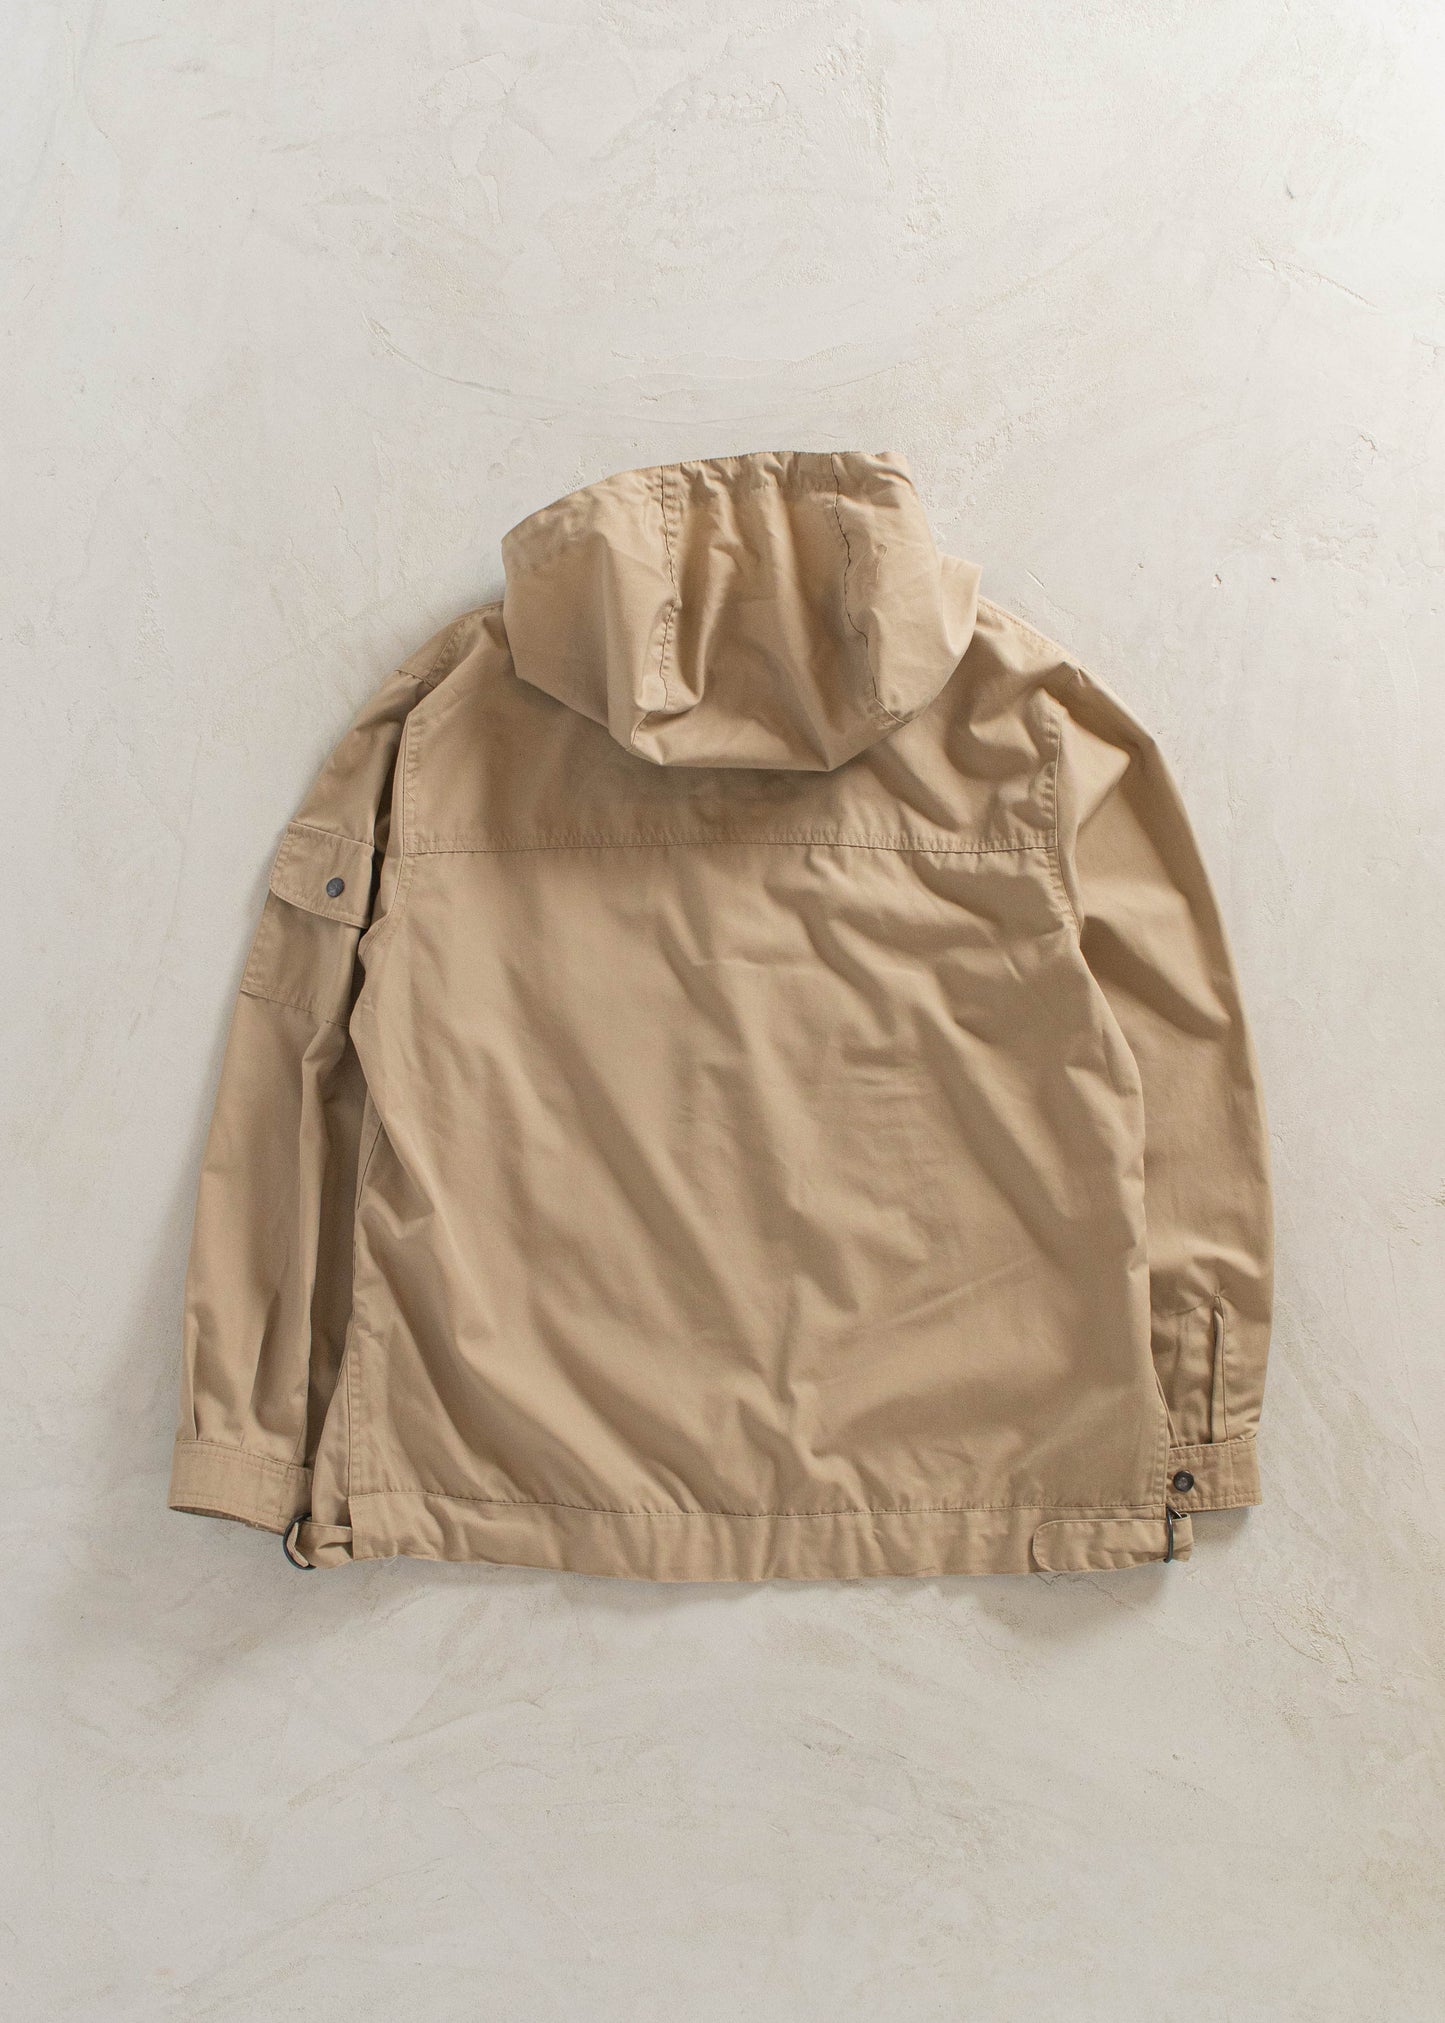 1980s Topher Pullover Anorak Jacket Size M/L